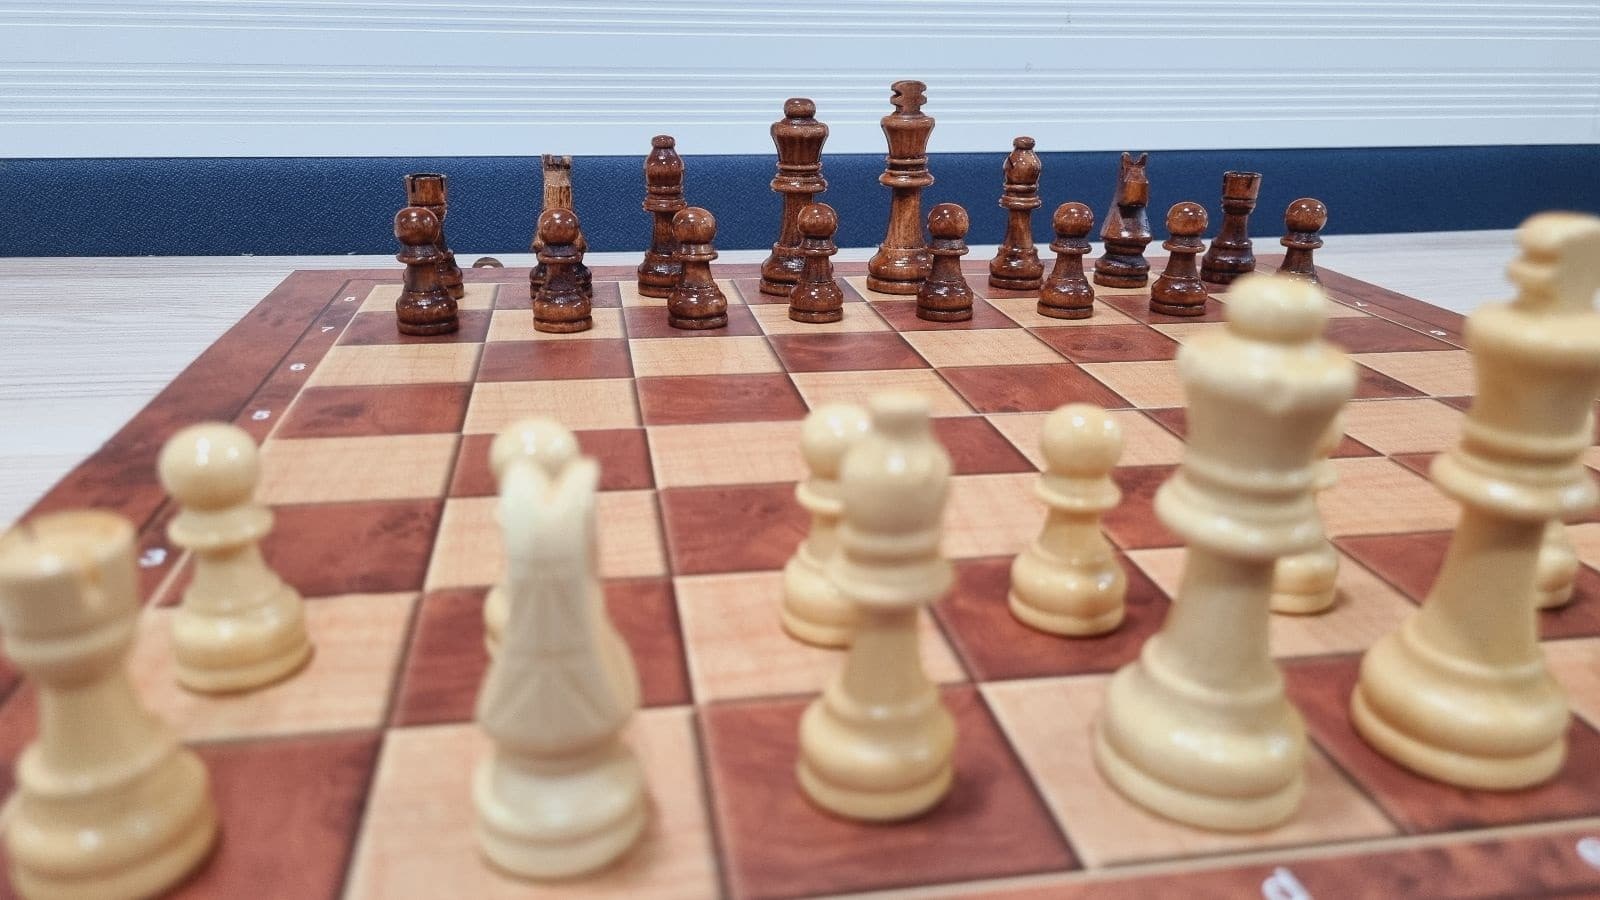 How Online Chess Can Help Beginners Improve Their Over-the-Board Performance